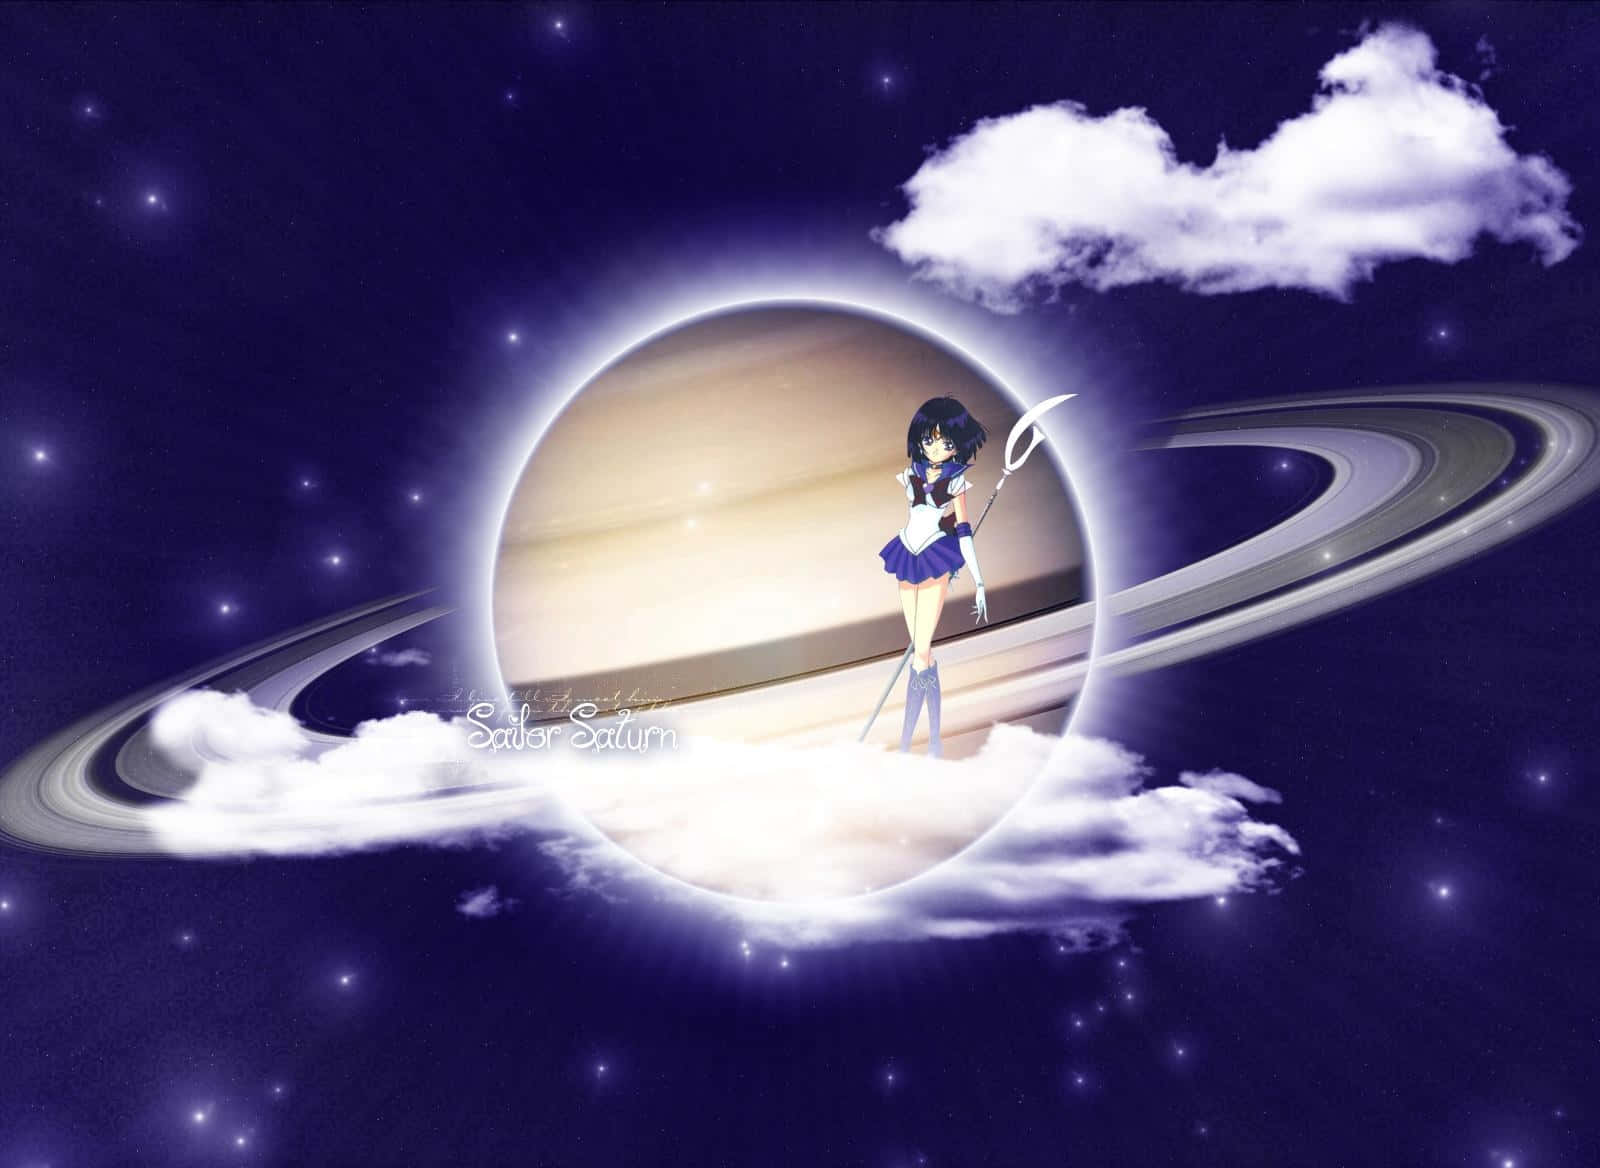 Sailor Saturn, Maiden Of Destruction, Stands Ready To Unleash Her Awesome Power Background